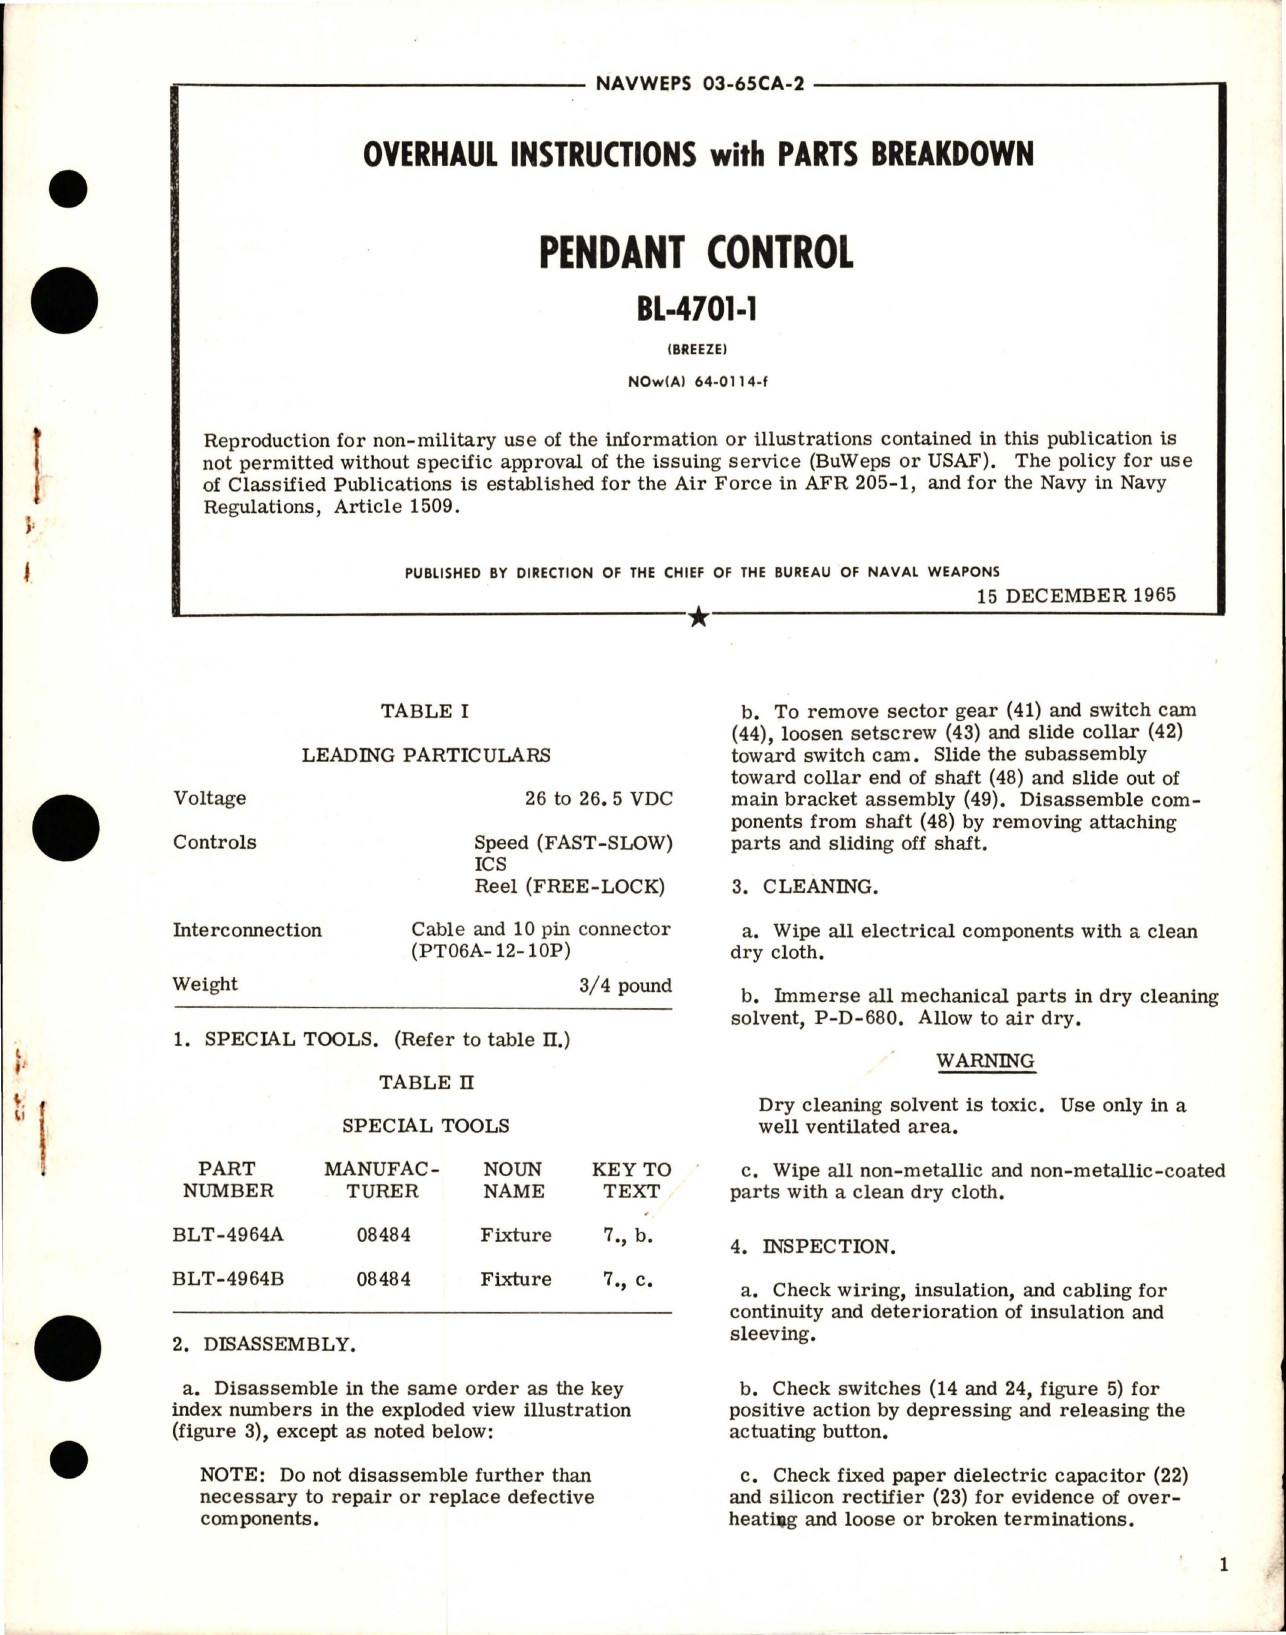 Sample page 1 from AirCorps Library document: Overhaul Instructions with Parts Breakdown for Pendant Control - BL-4701-1